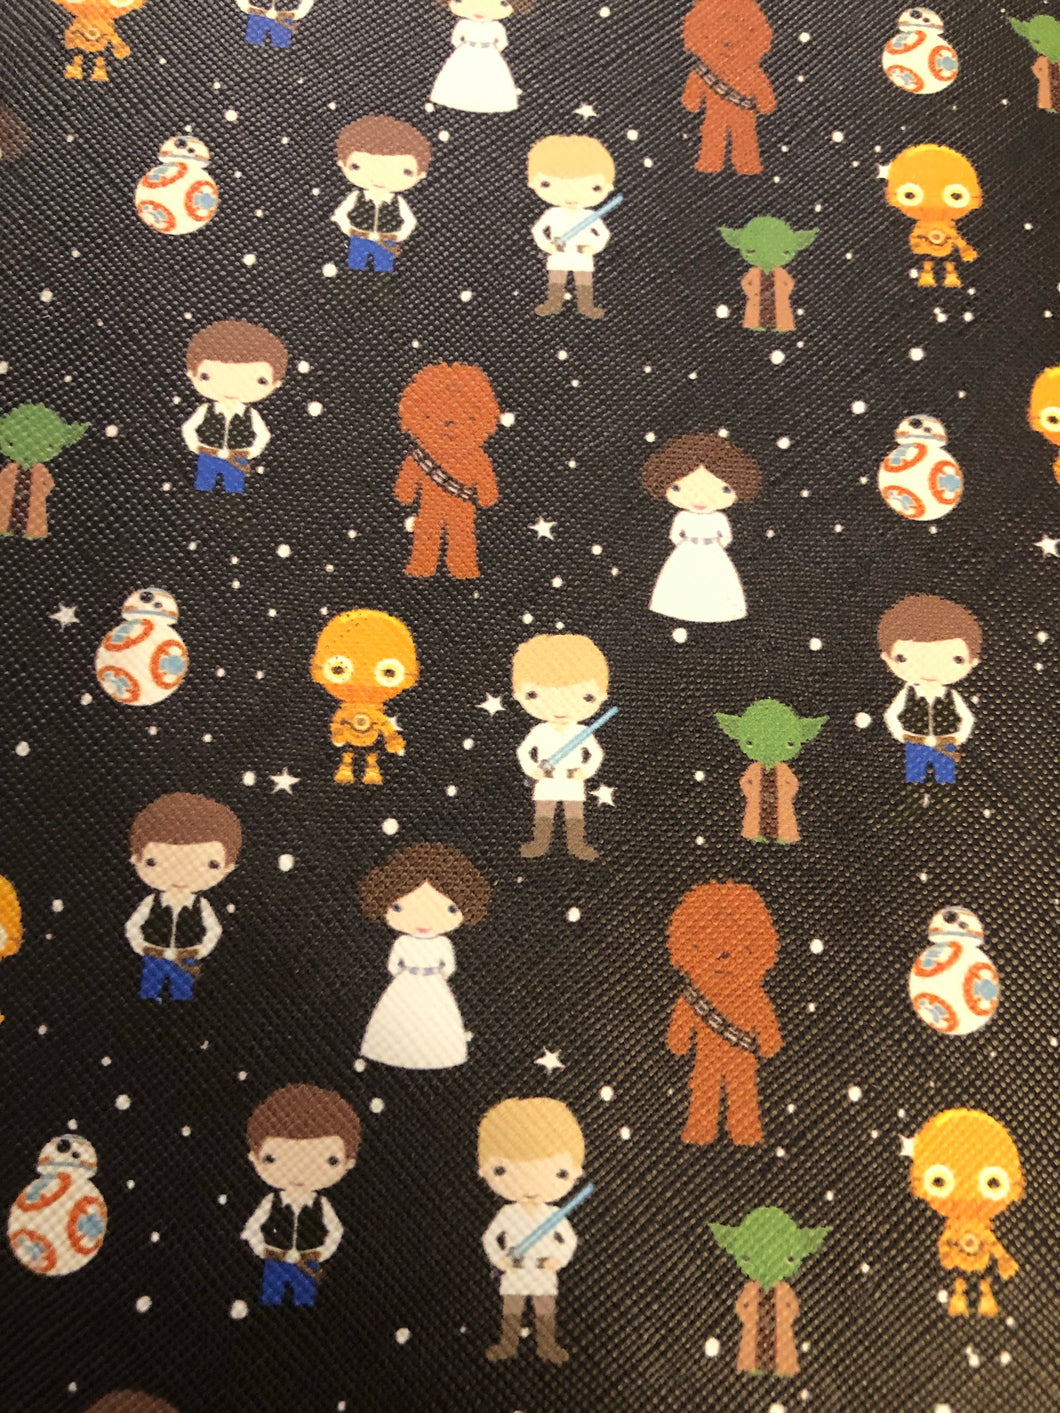 Star Wars Characters Vaccination  Card Holder